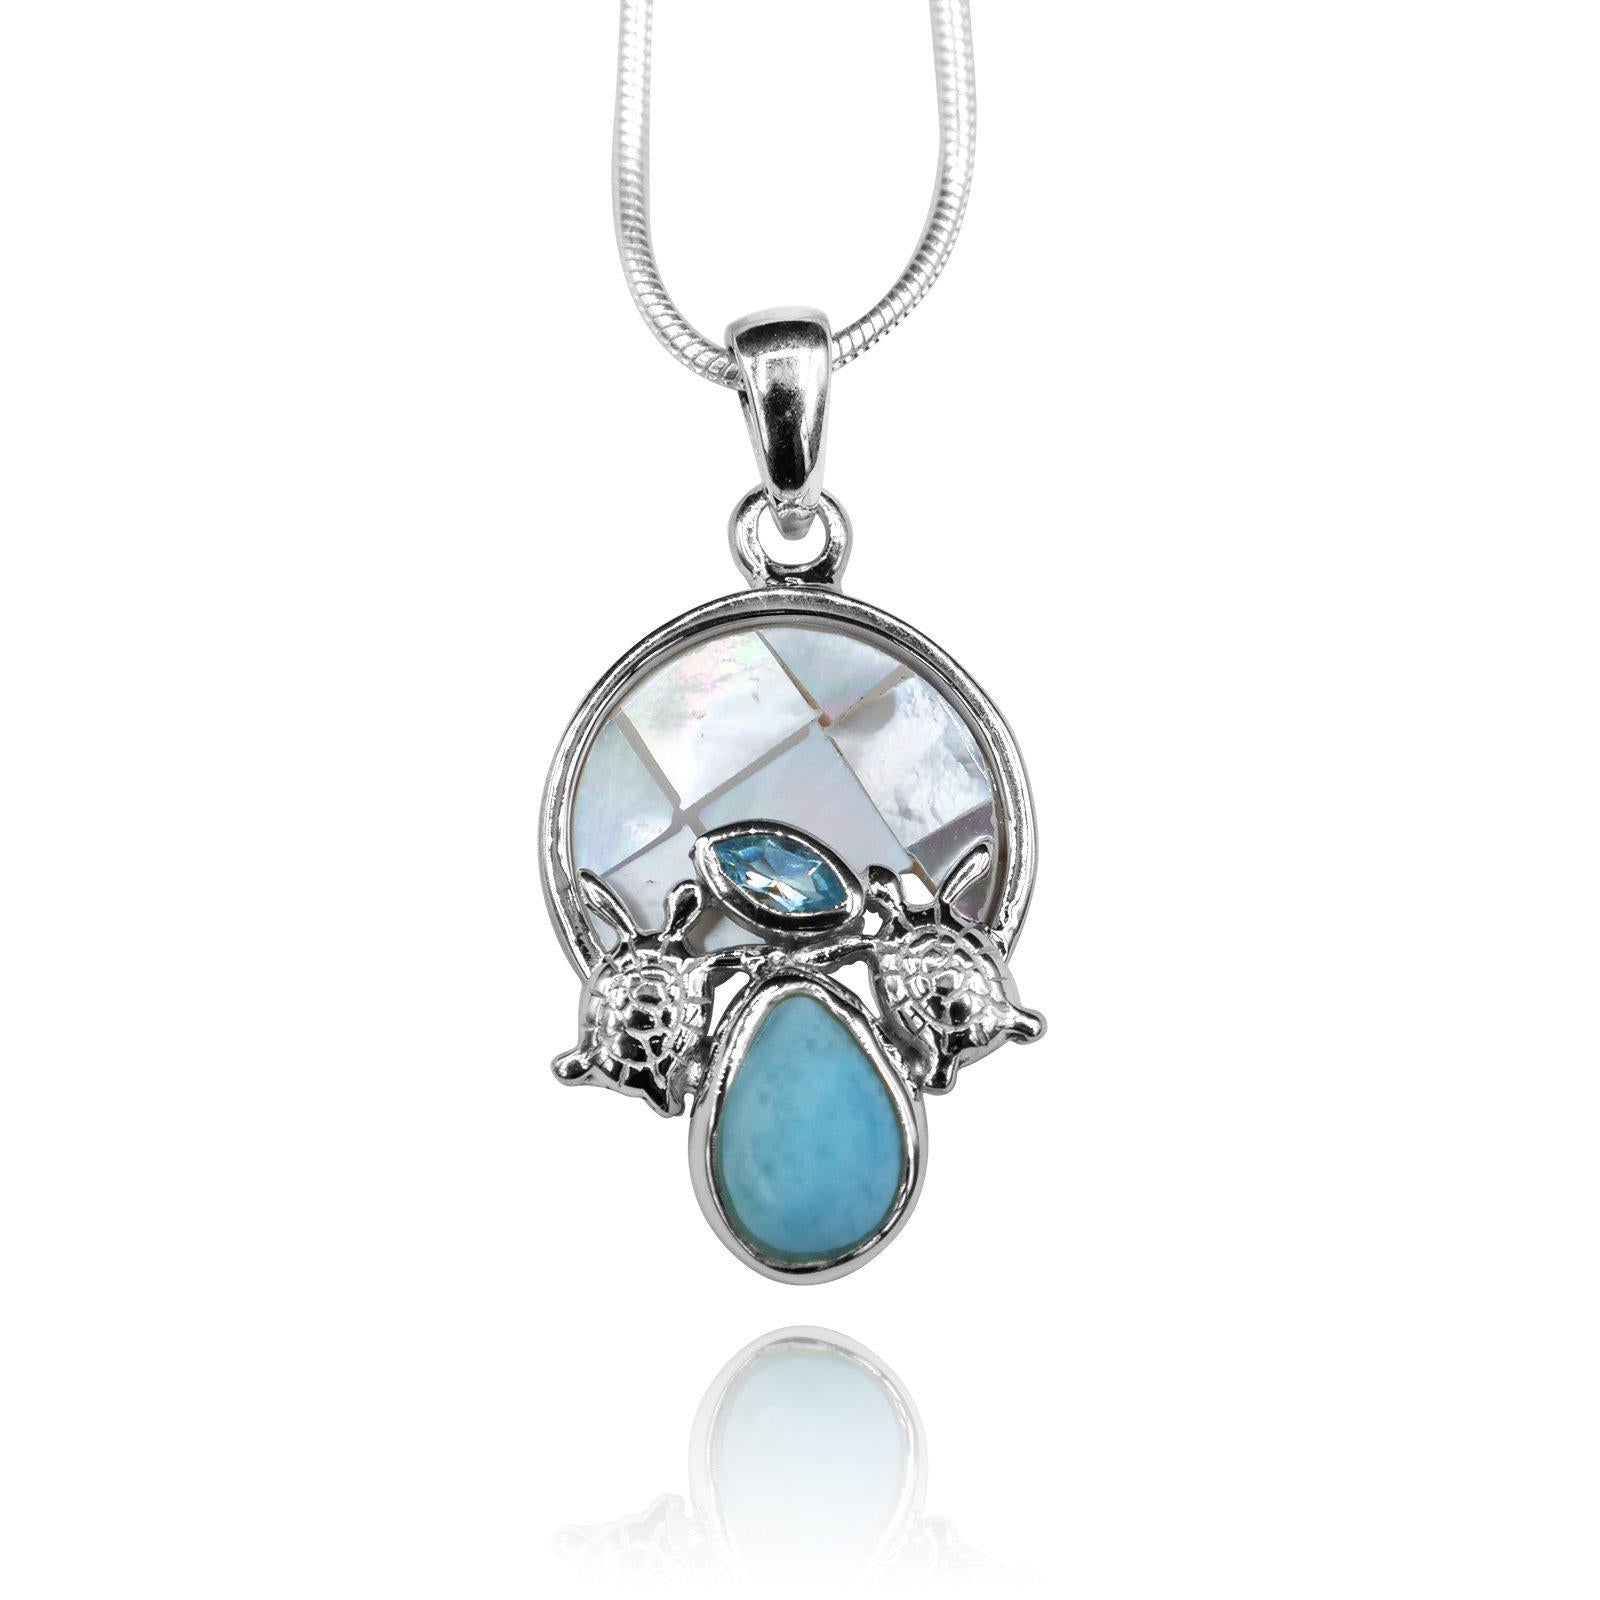 Sea Turtles Pendant Necklace with Blue Topaz, Mother of Pearl Mosaic and Larimar Stone